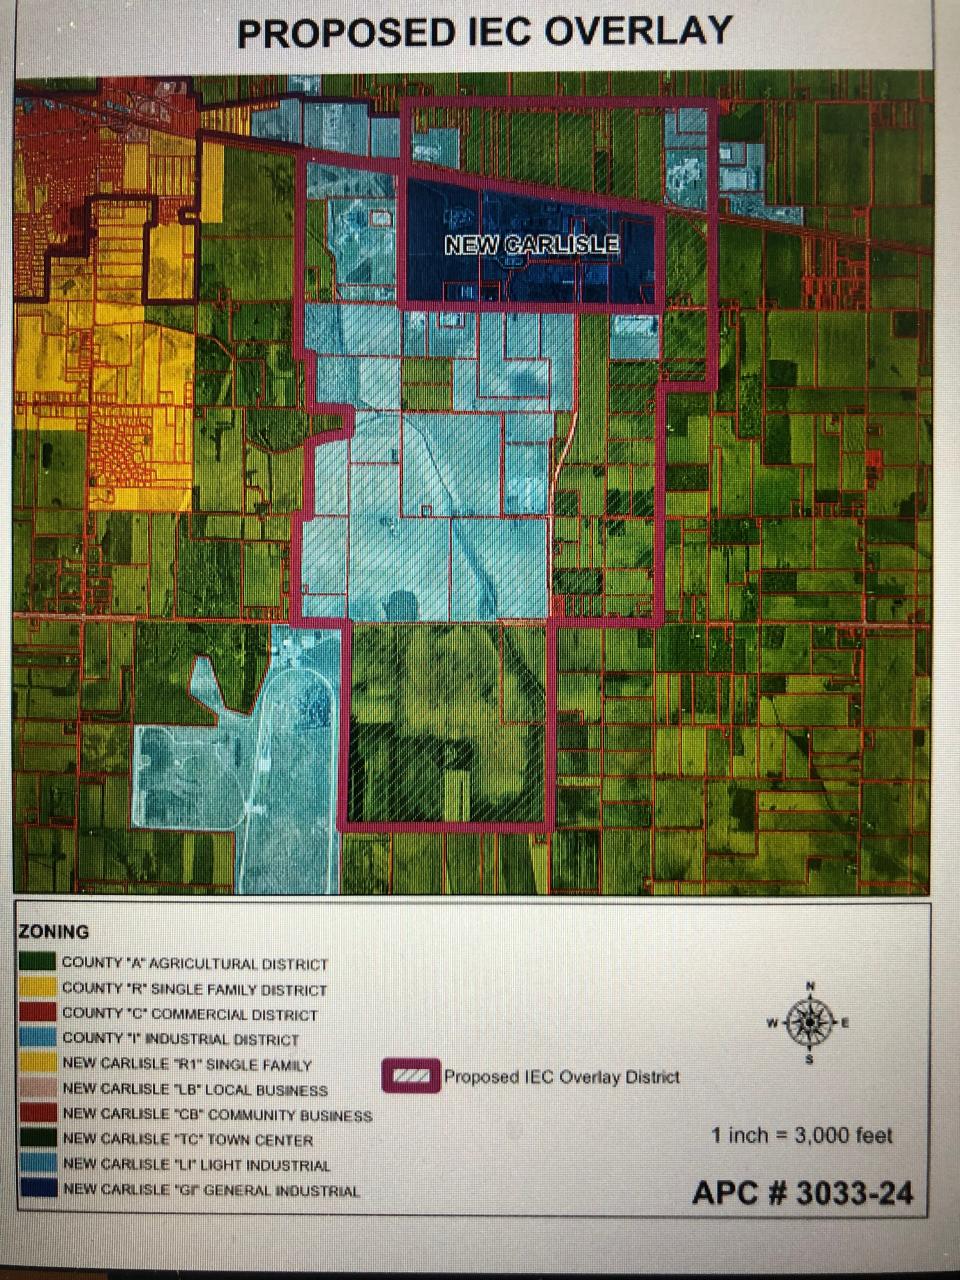 In this map, the southernmost quadrant would be added to the Indiana Enterprise Center near New Carlisle in a proposal coming to the St. Joseph County Council. The addition is just east of the Navistar Proving Grounds' oval track.